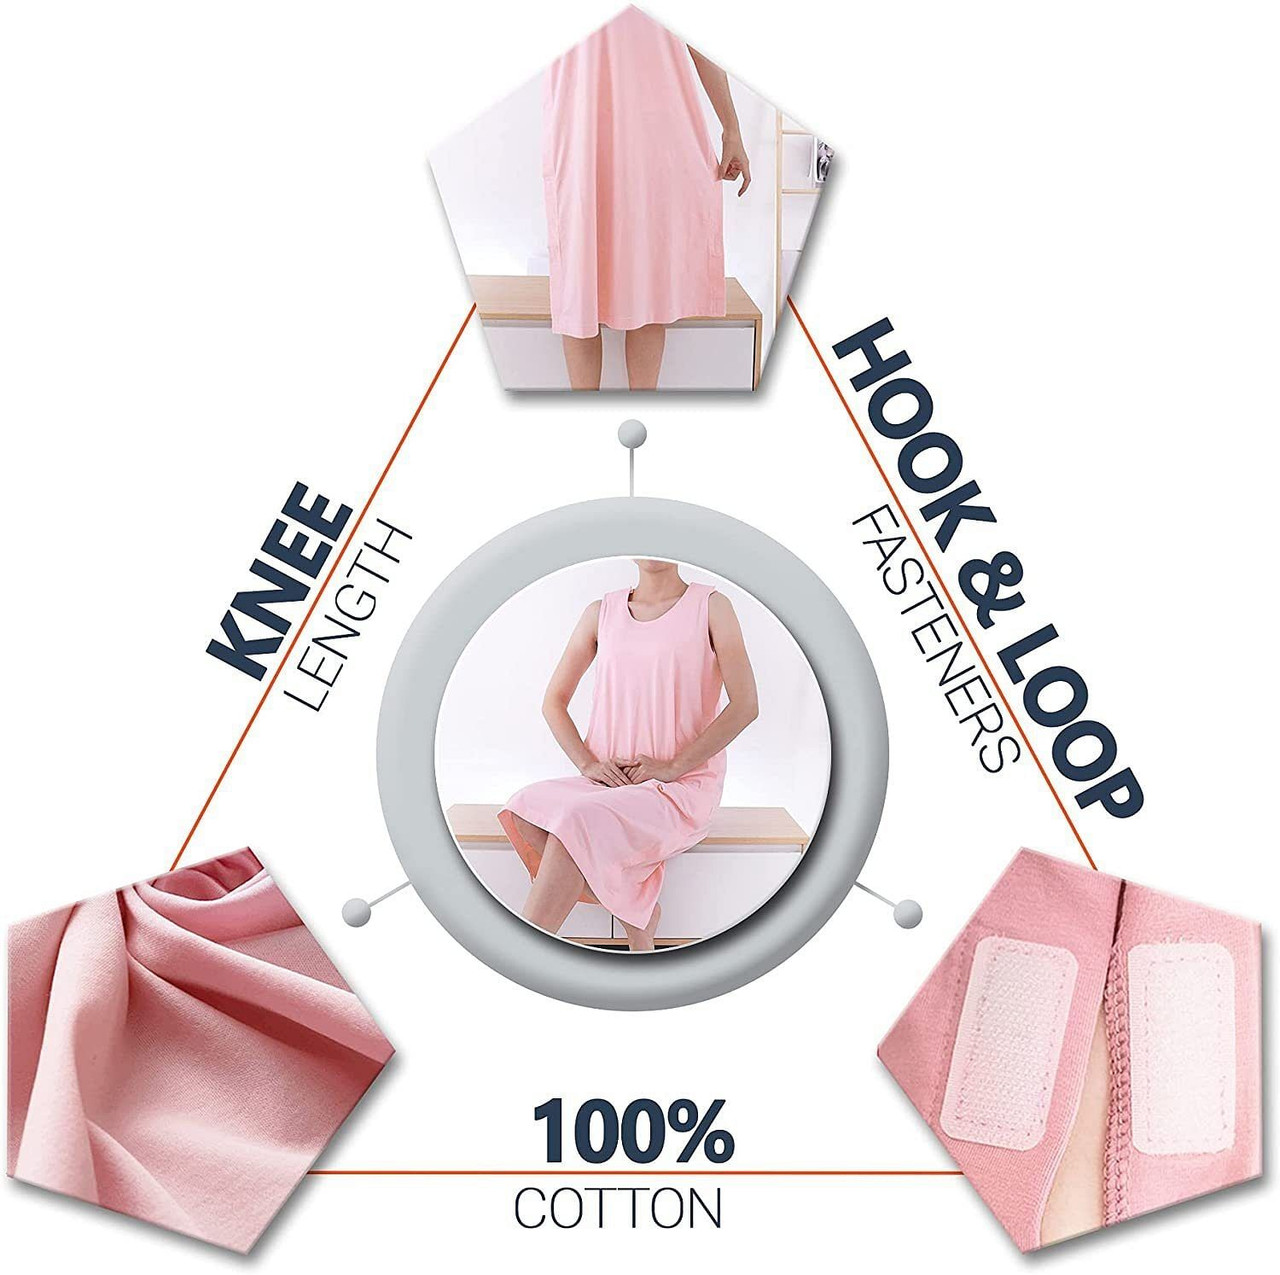 Pink 100% Cotton Hospital Gown. Medium Patient Robe for Women. Women's Clothing after Surgery.